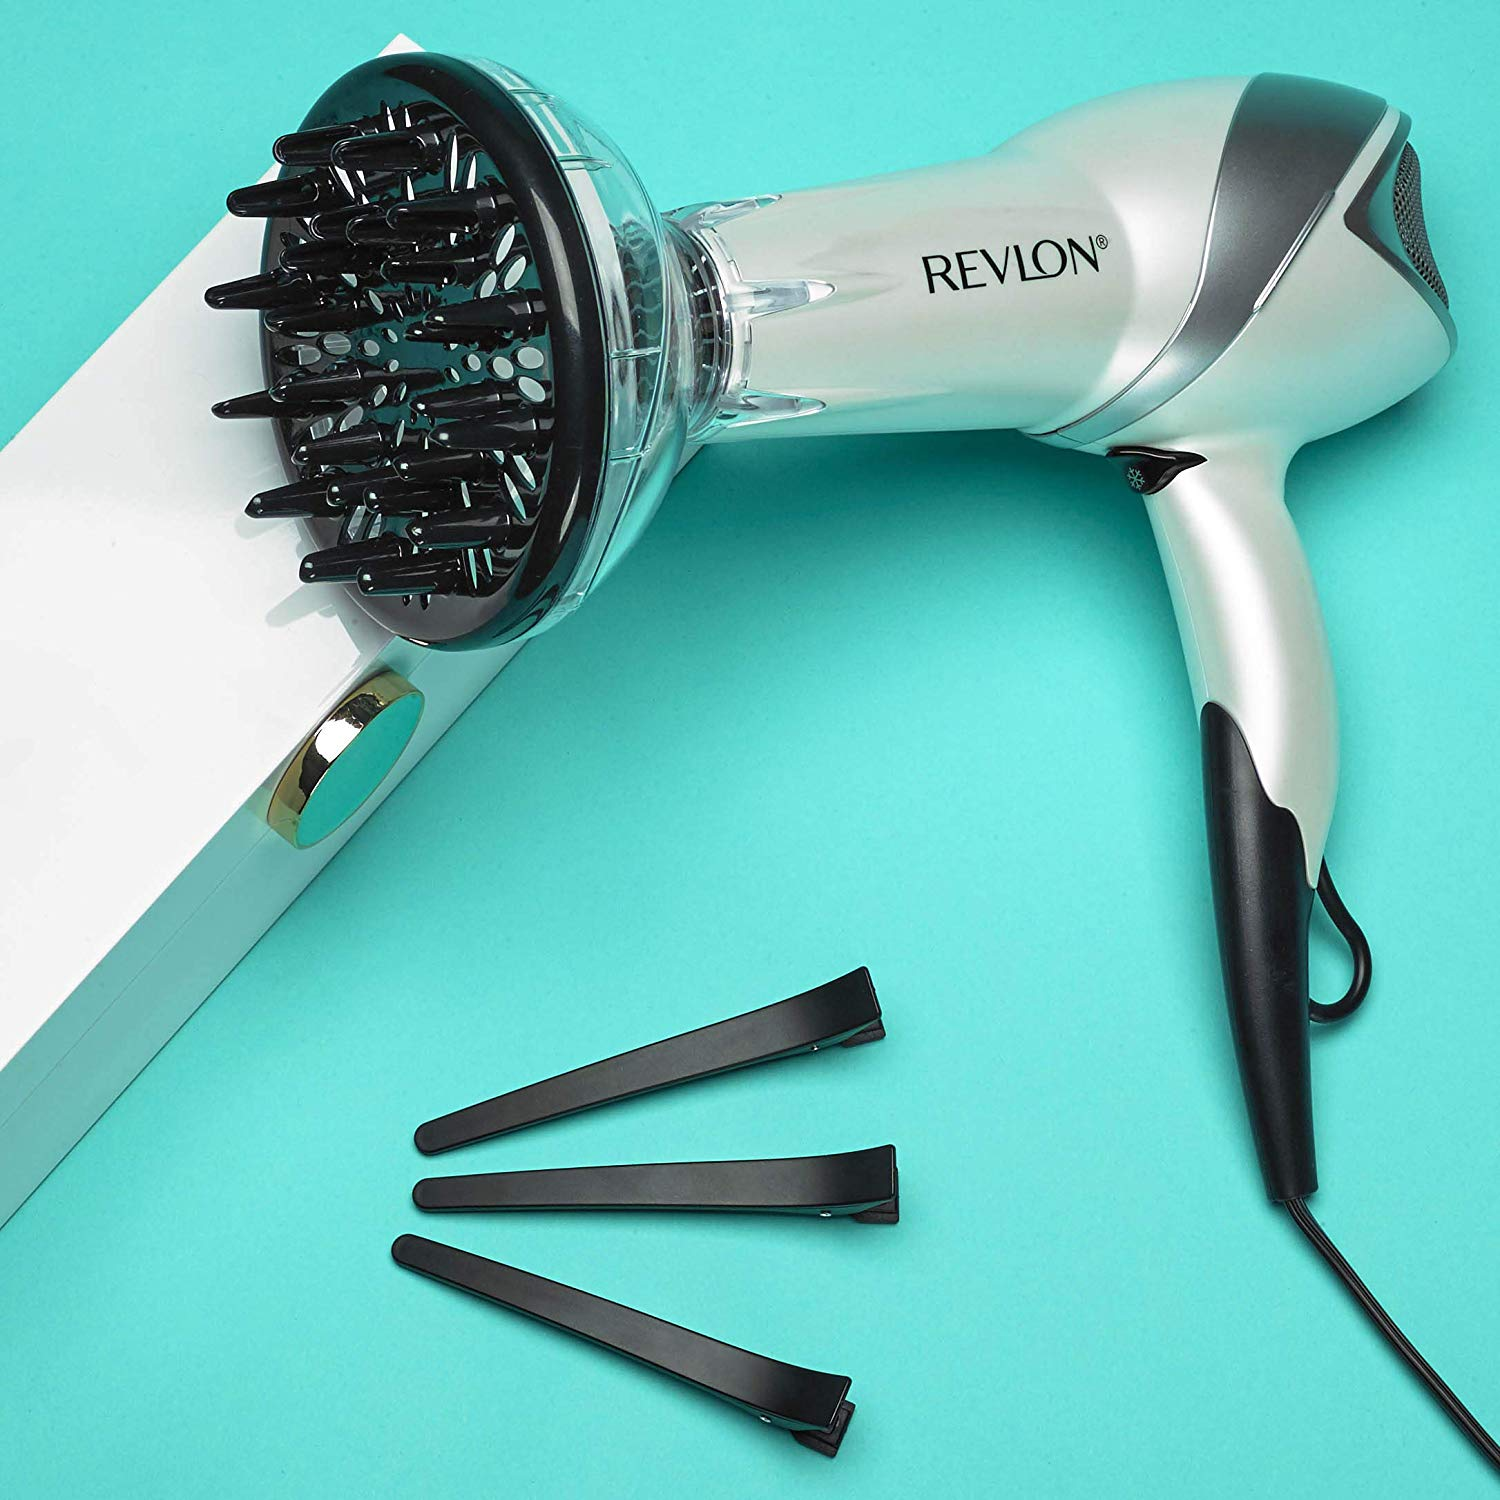 Revlon 1875W Infrared Hair Dryer with Hair Clips Only $13.19!